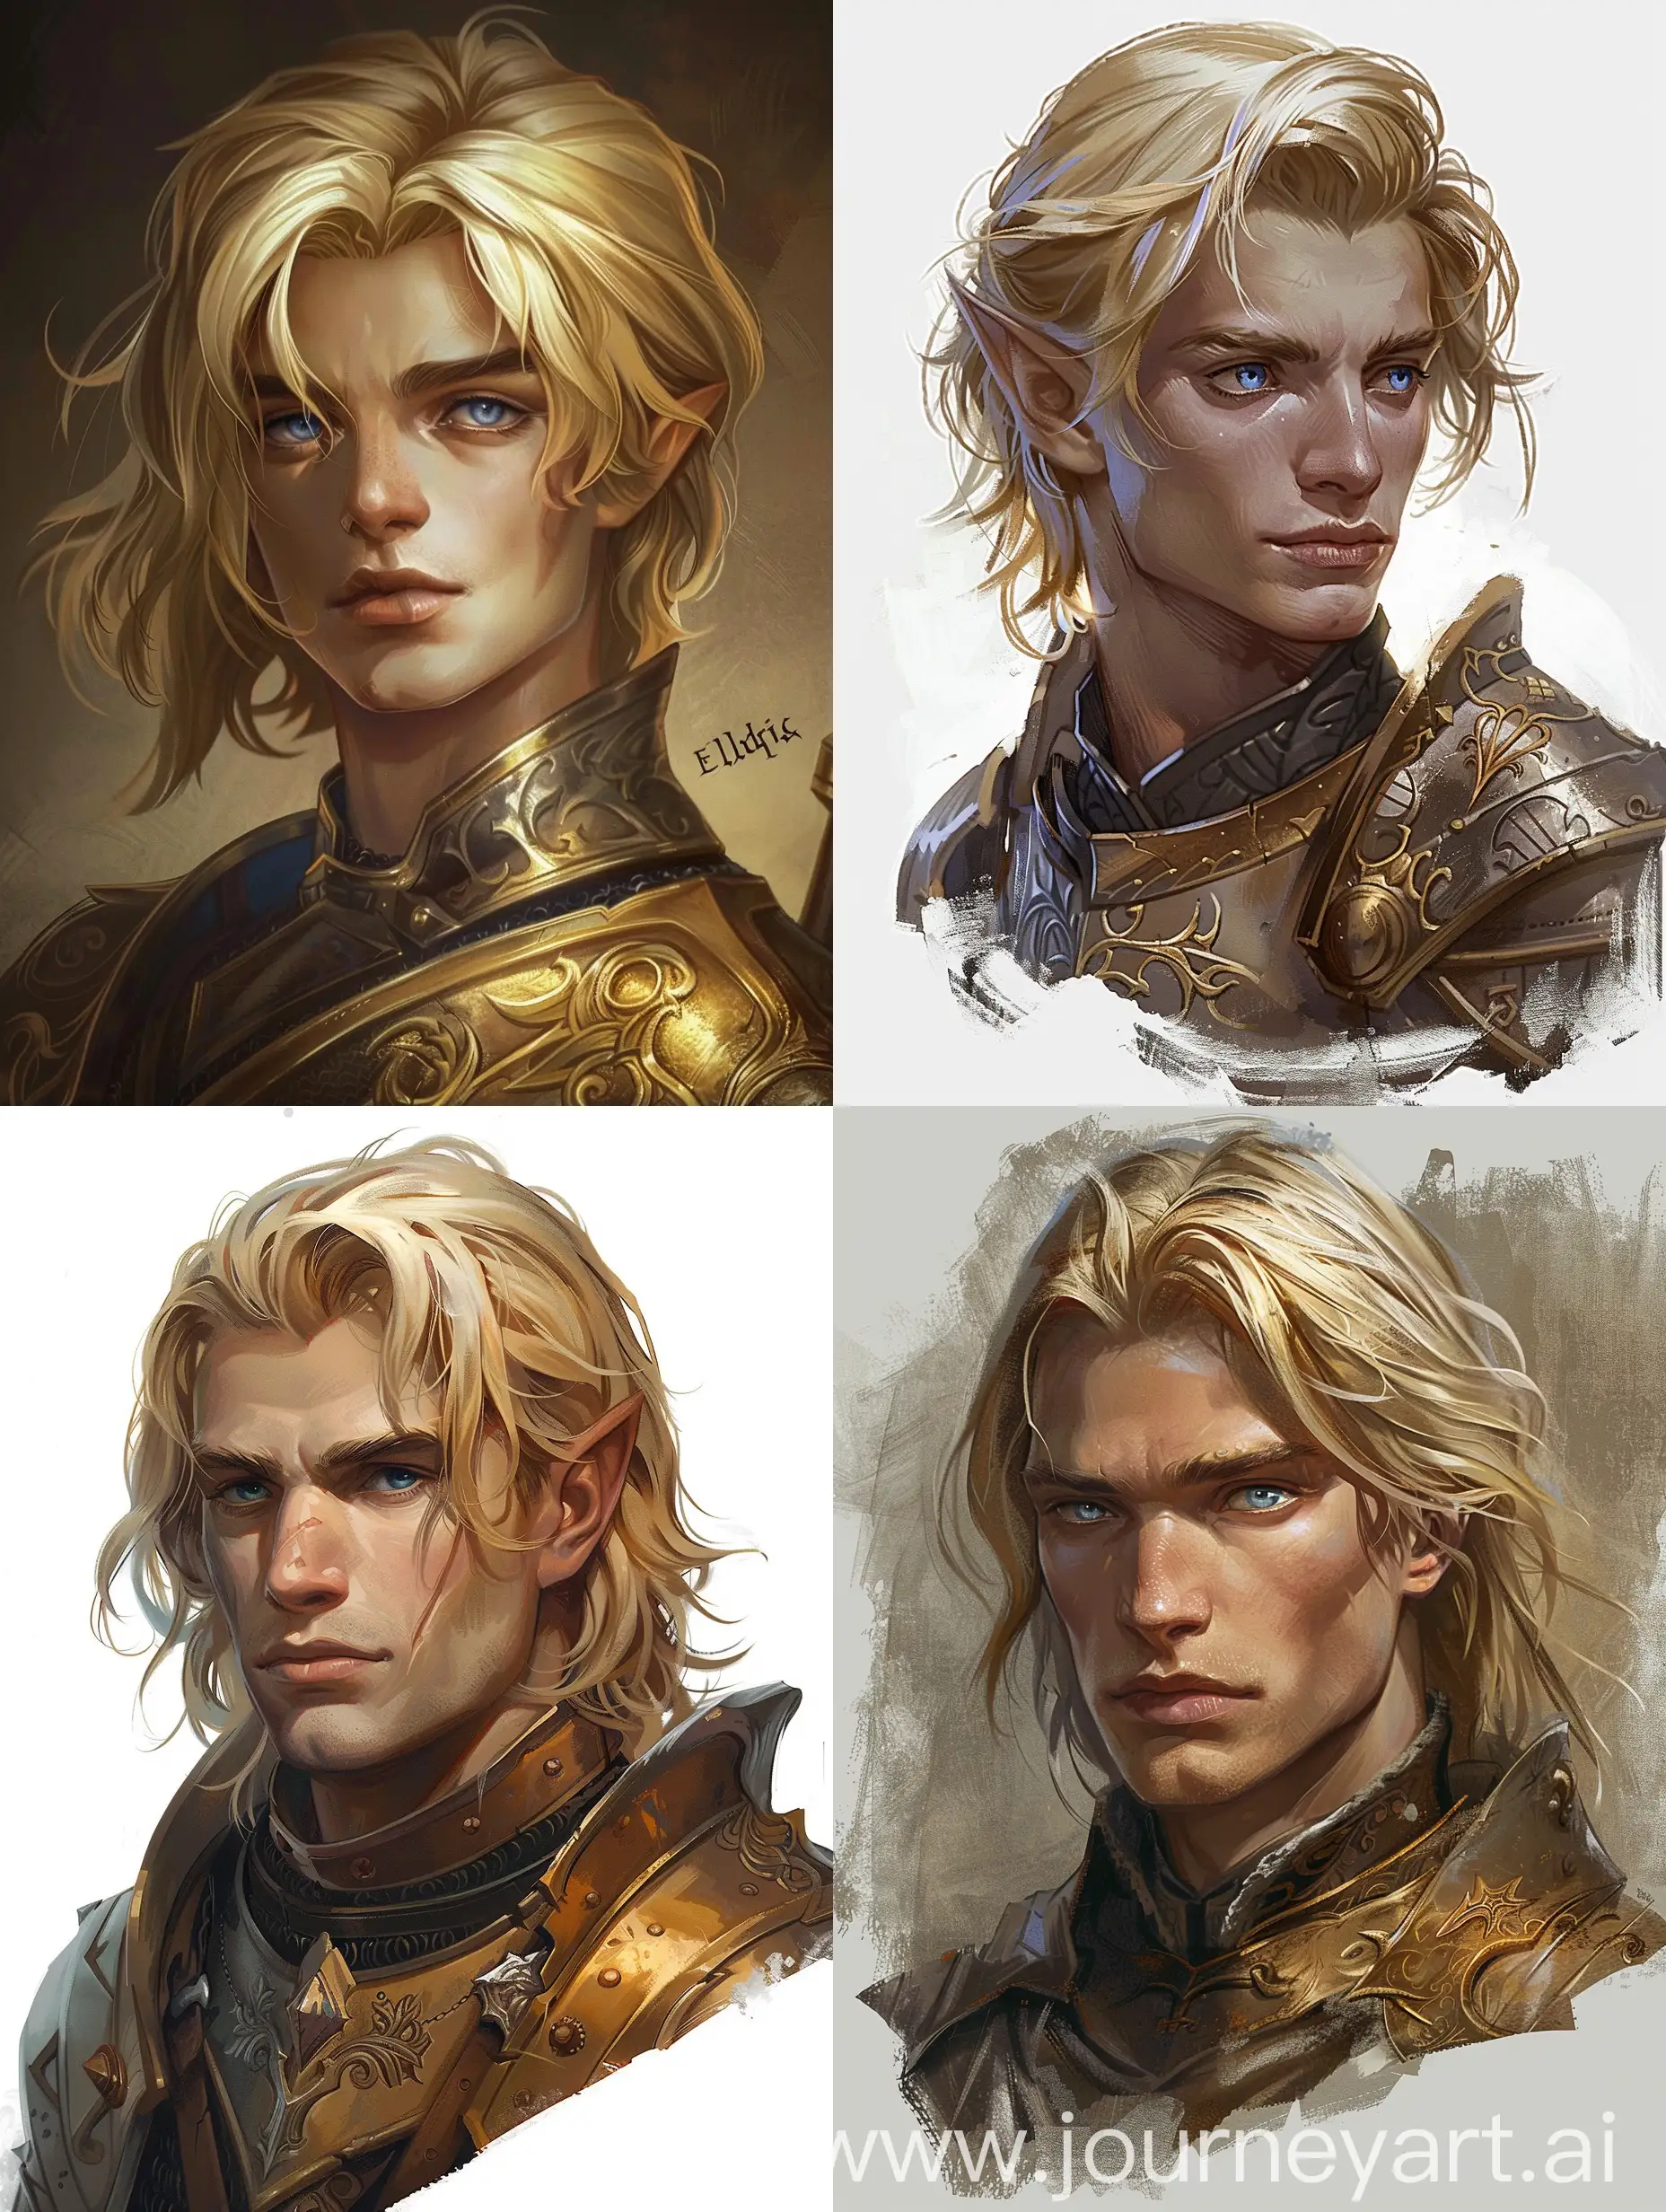 Valiant-Blonde-Knight-with-Determined-Blue-Eyes-in-Fantasy-World